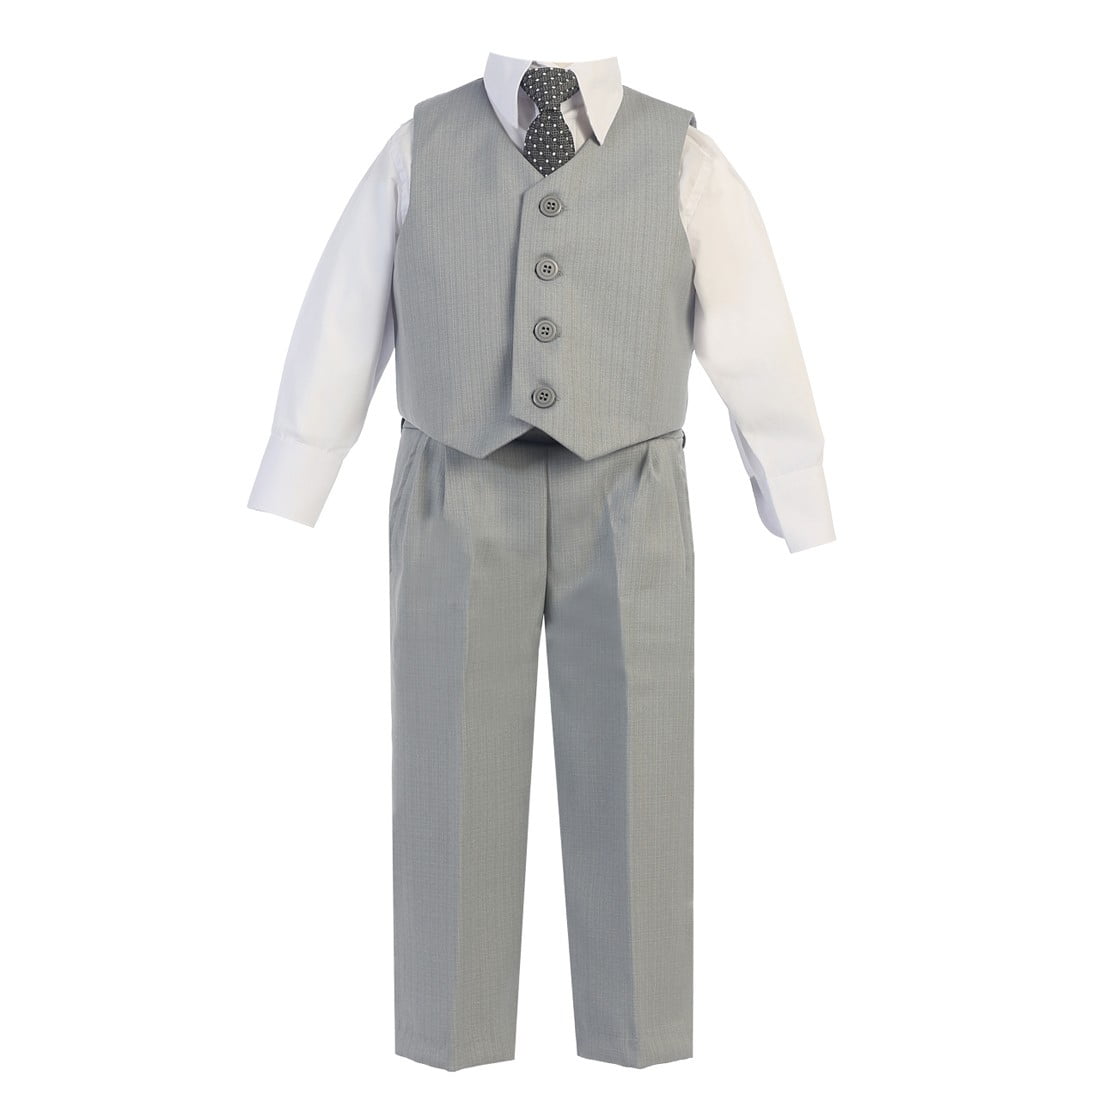 Kids World  NEW All Colors & Sizes Modern Stylish Boys 5 PC Suits Sale!! 